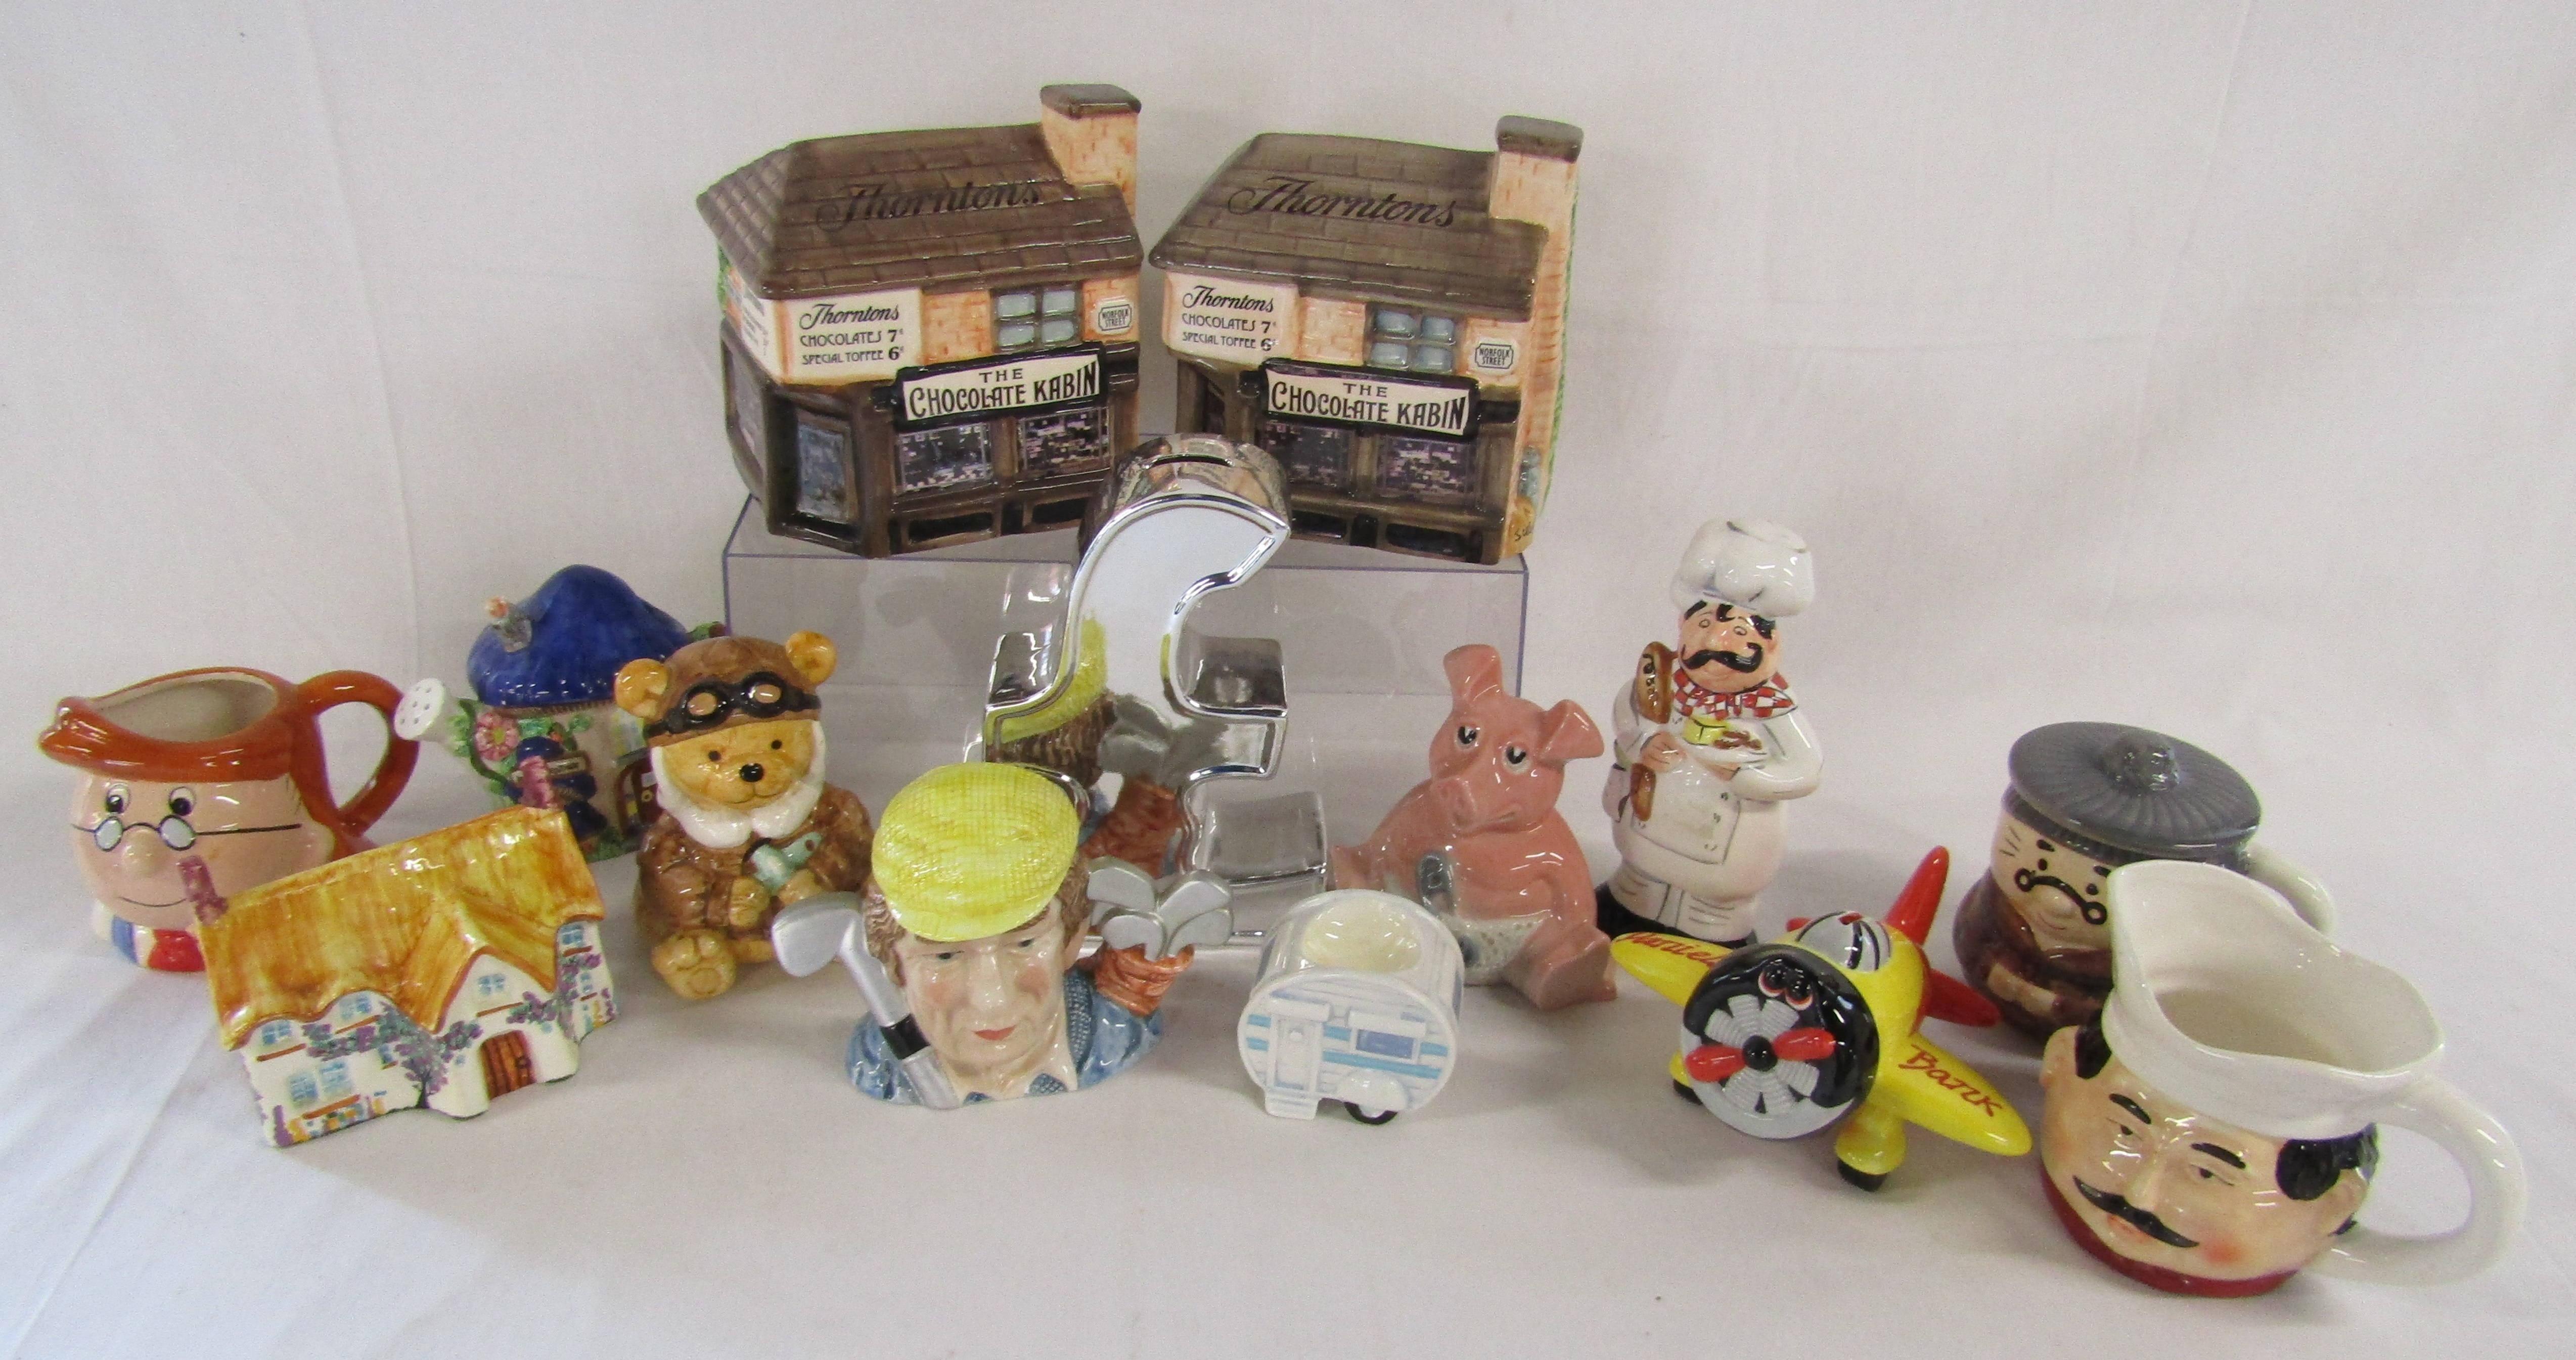 Money boxes includes Wade Natwest baby pig, Thorntons shops, character mugs includes Tetley Tea's